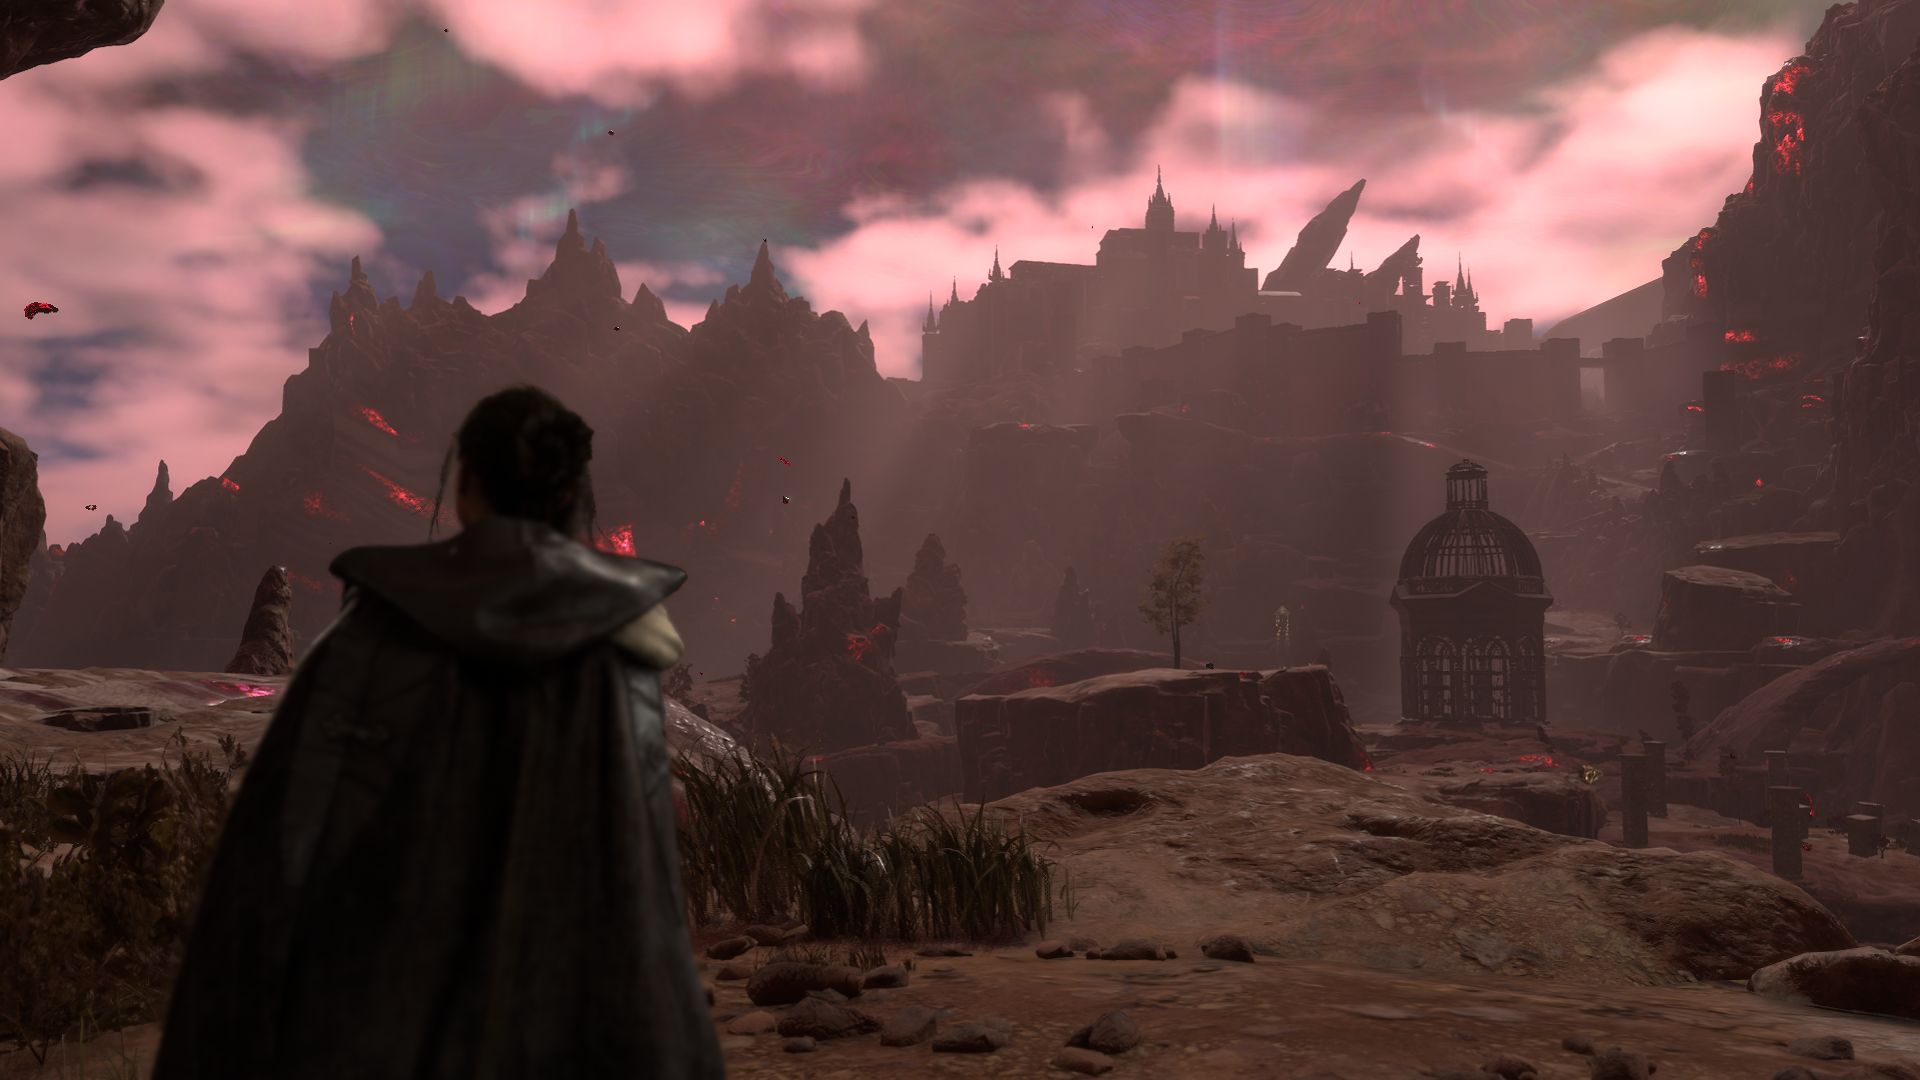 Frey, Protagonist of Forspoken, is standing looking at the terrifying black and gray rock landscape, a castle in the distance.  There are red clouds in the sky and red particles floating in the air